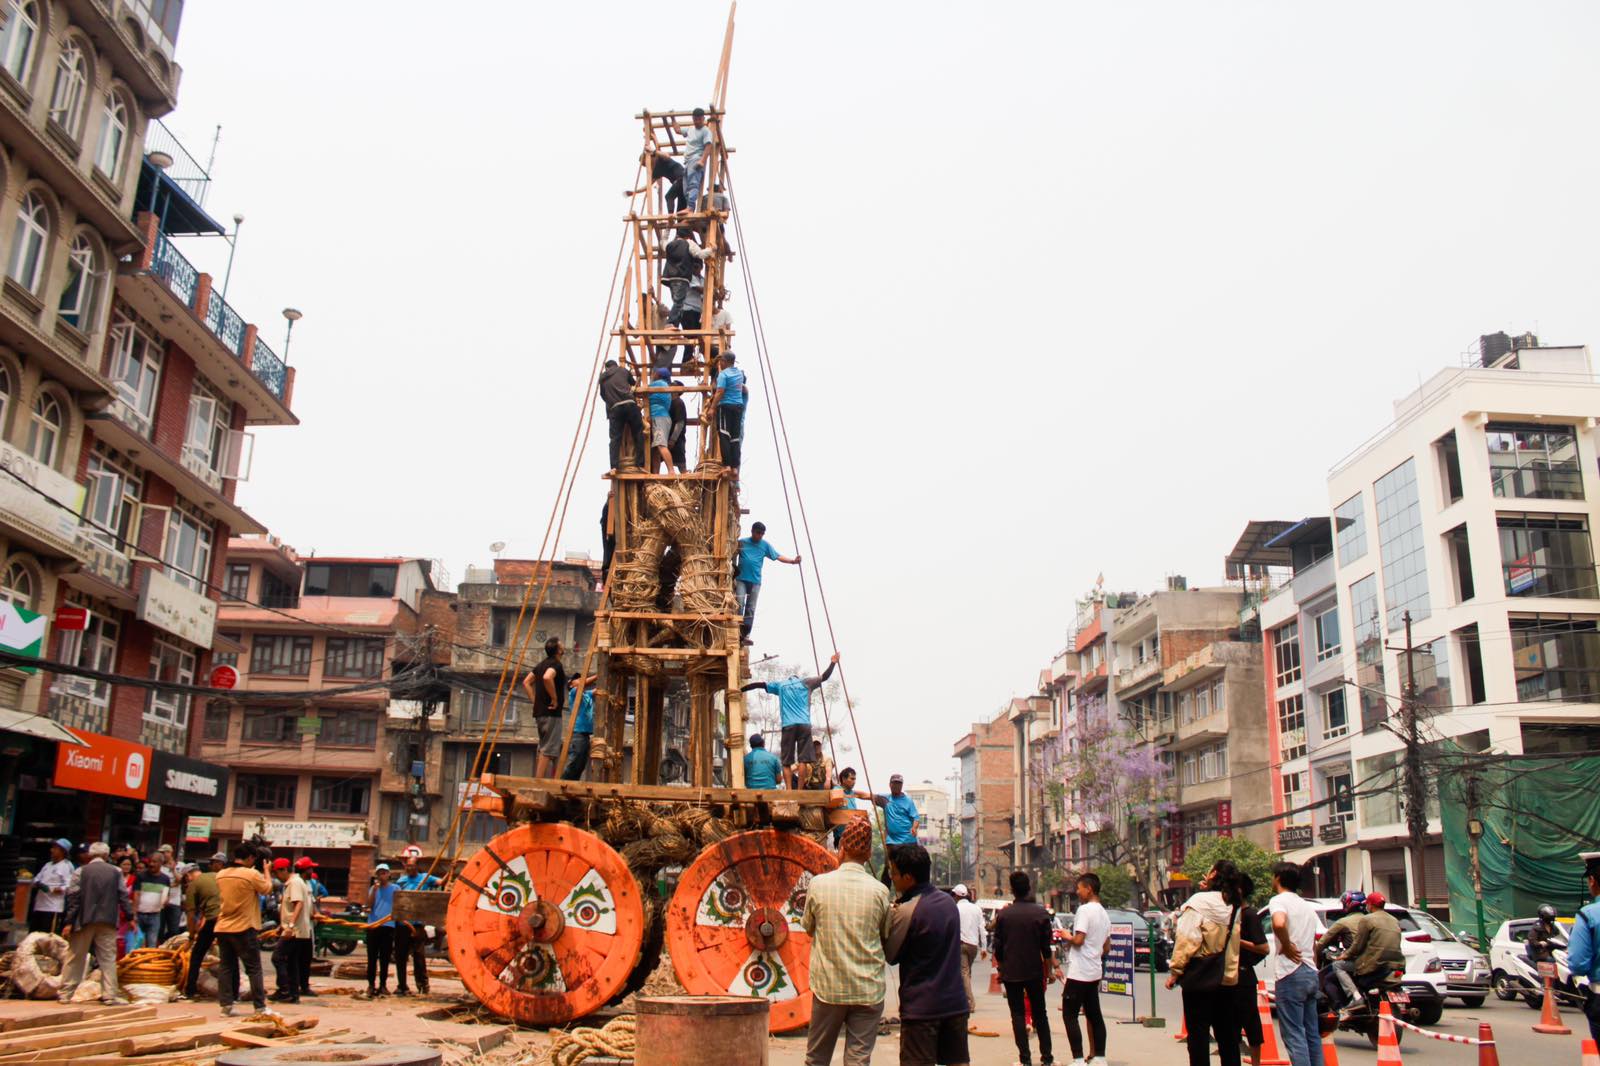 In Pictures: Preparations underway for Rato Machindranath chariot procession at Lalitpur